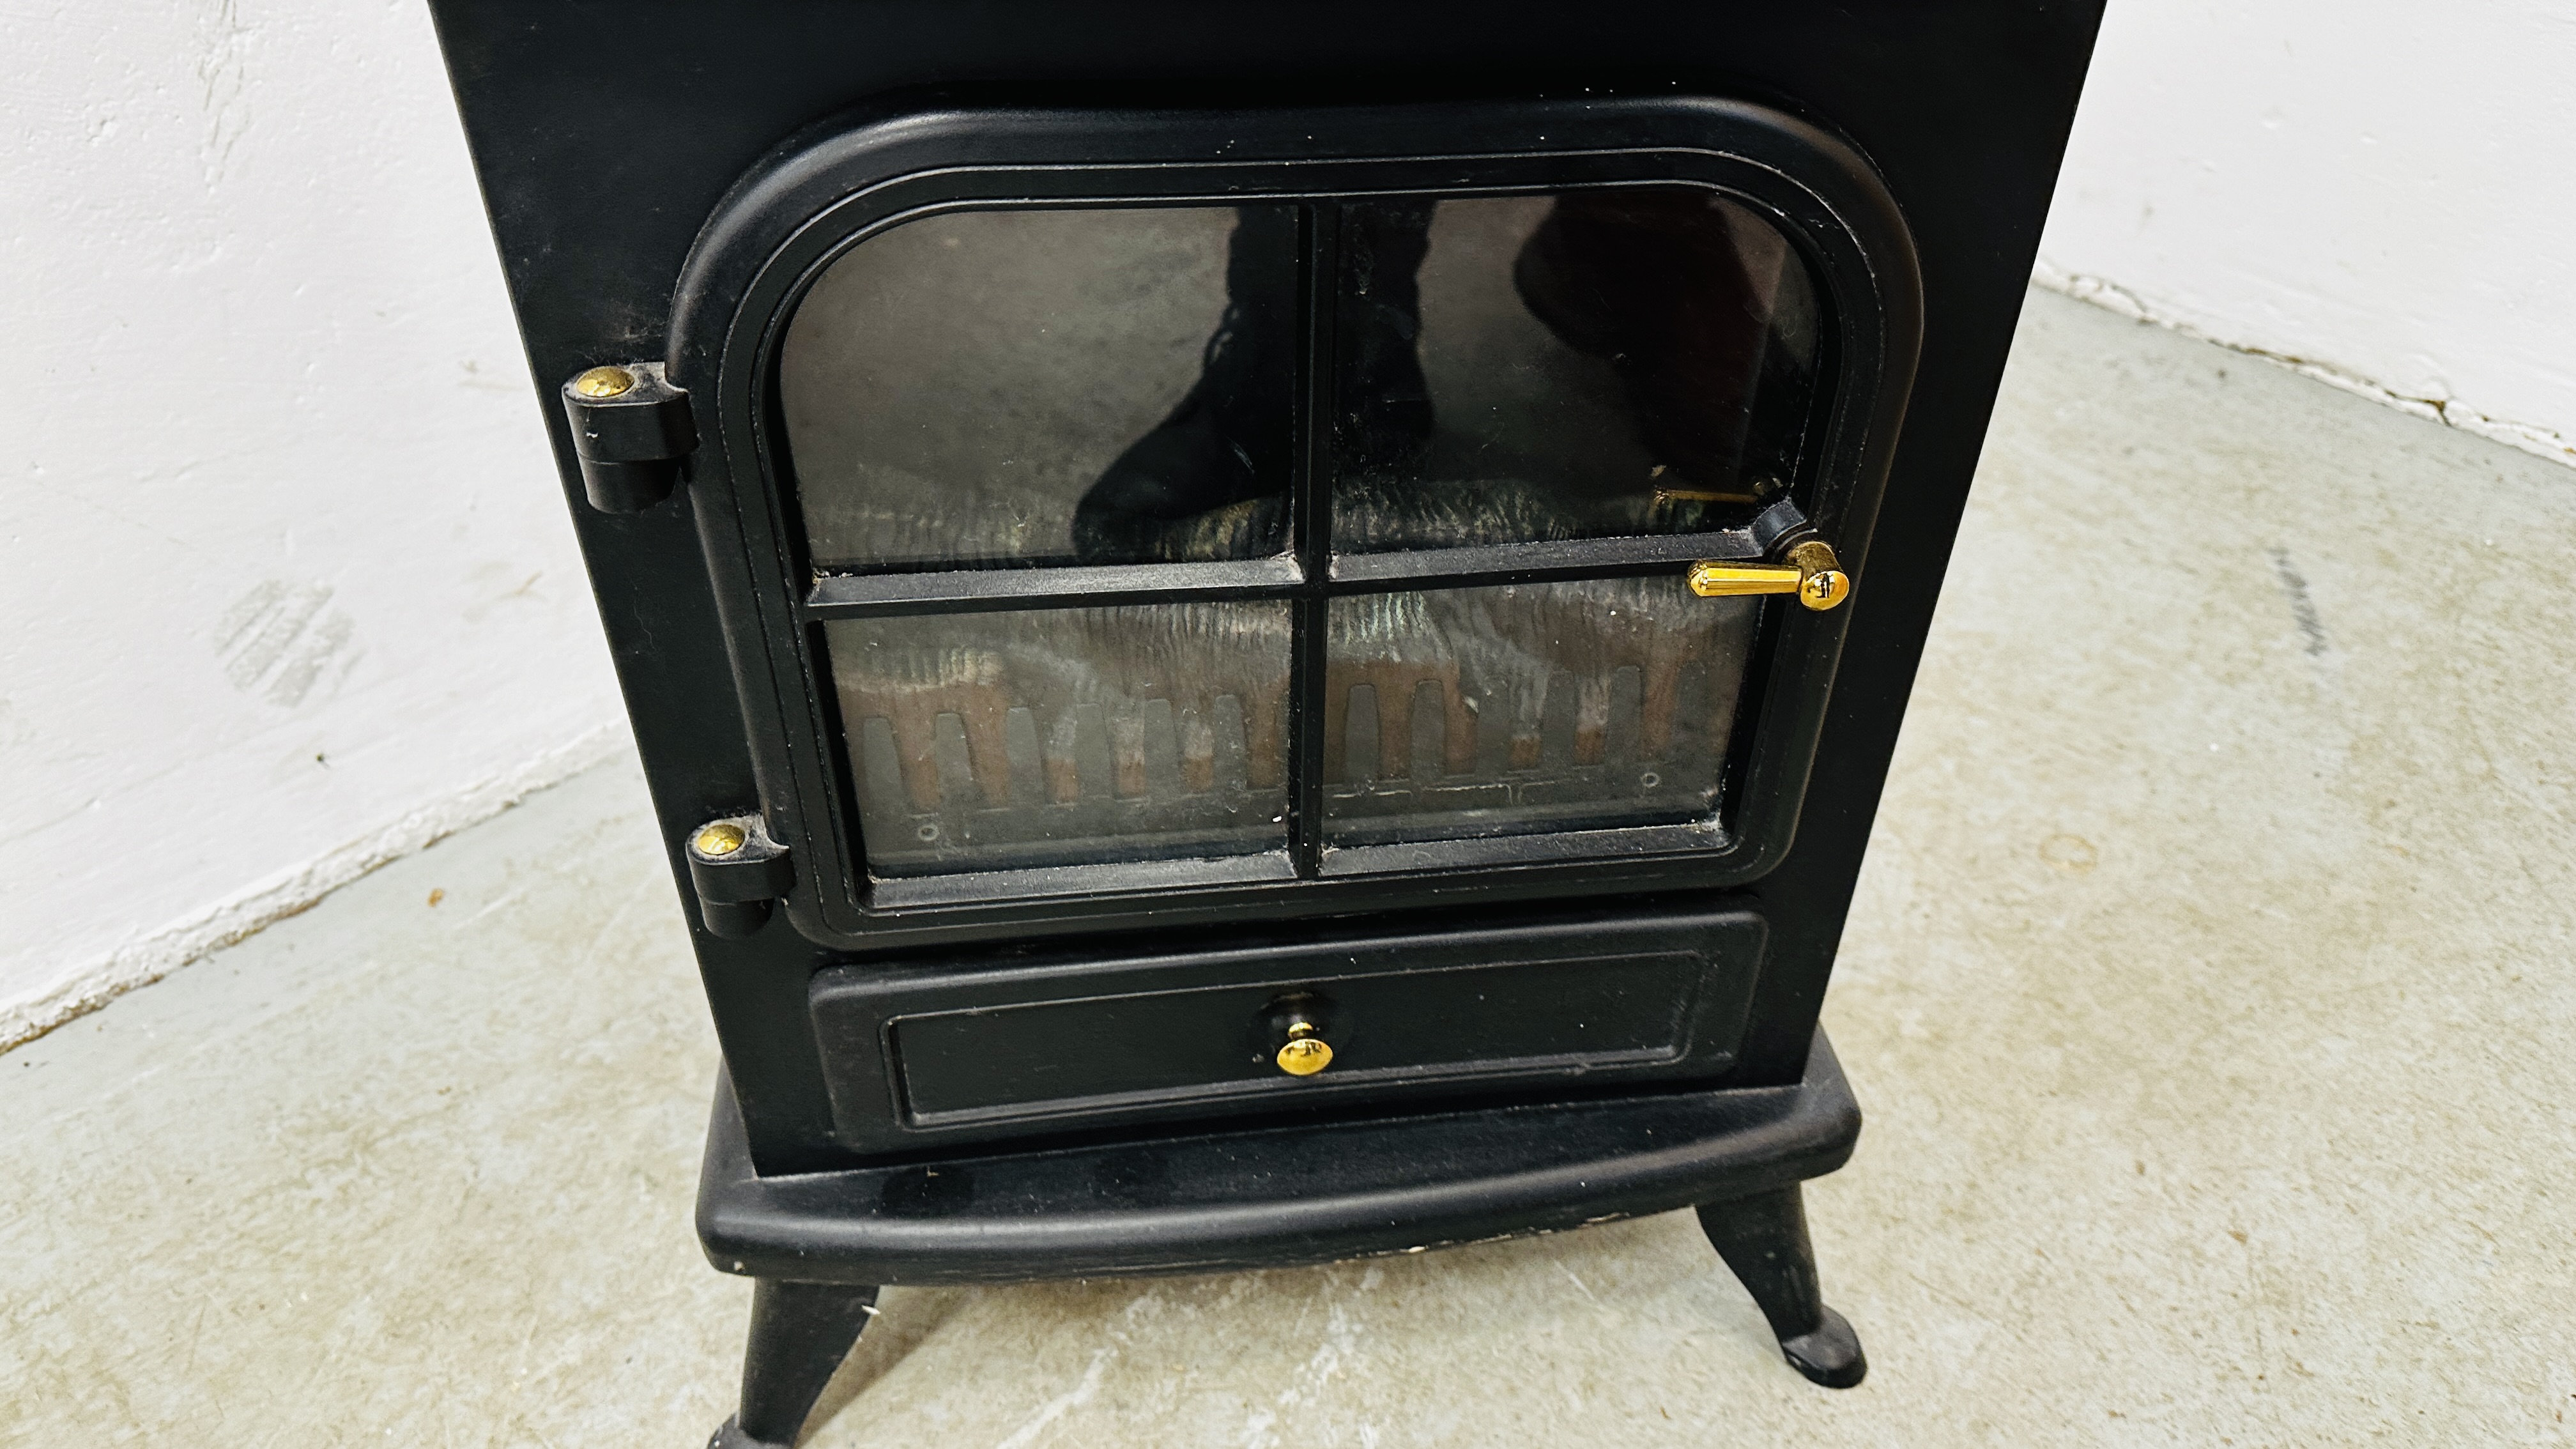 SOLID FUEL EFFECT ELECTRIC ROOM HEATER - SOLD AS SEEN. - Image 4 of 4